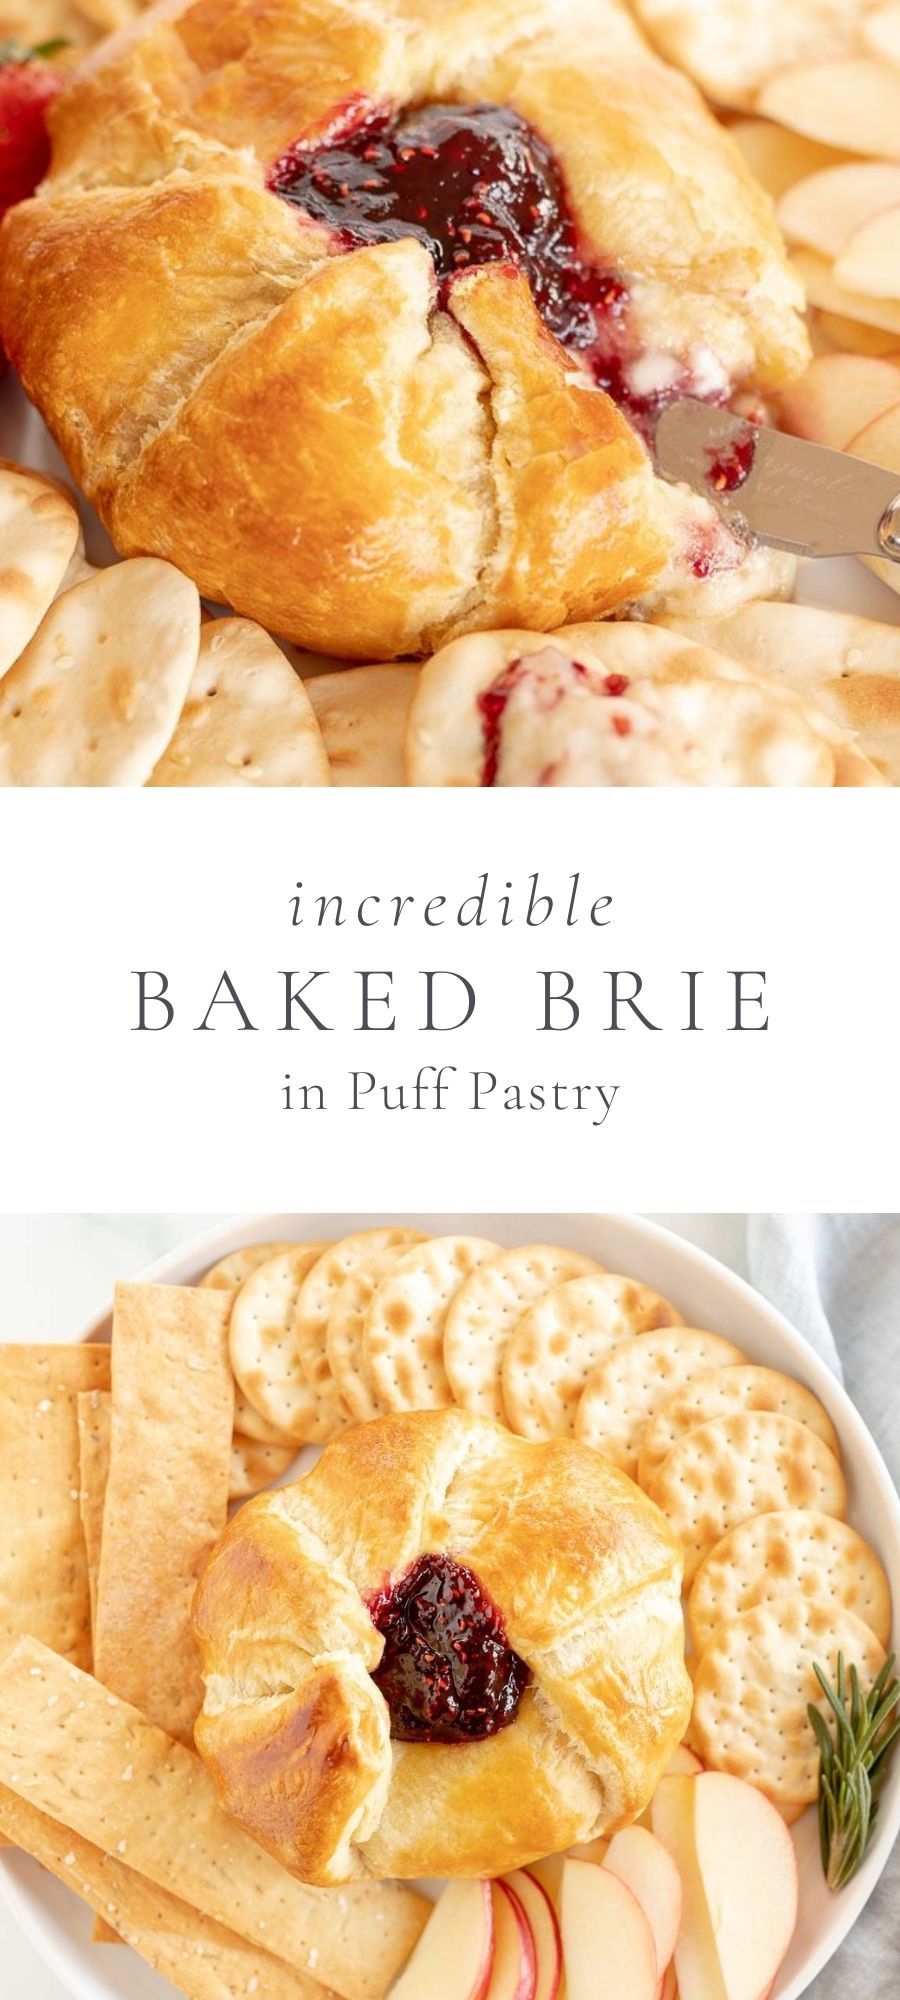 two pictures of baked brie on a platter with text to describe it